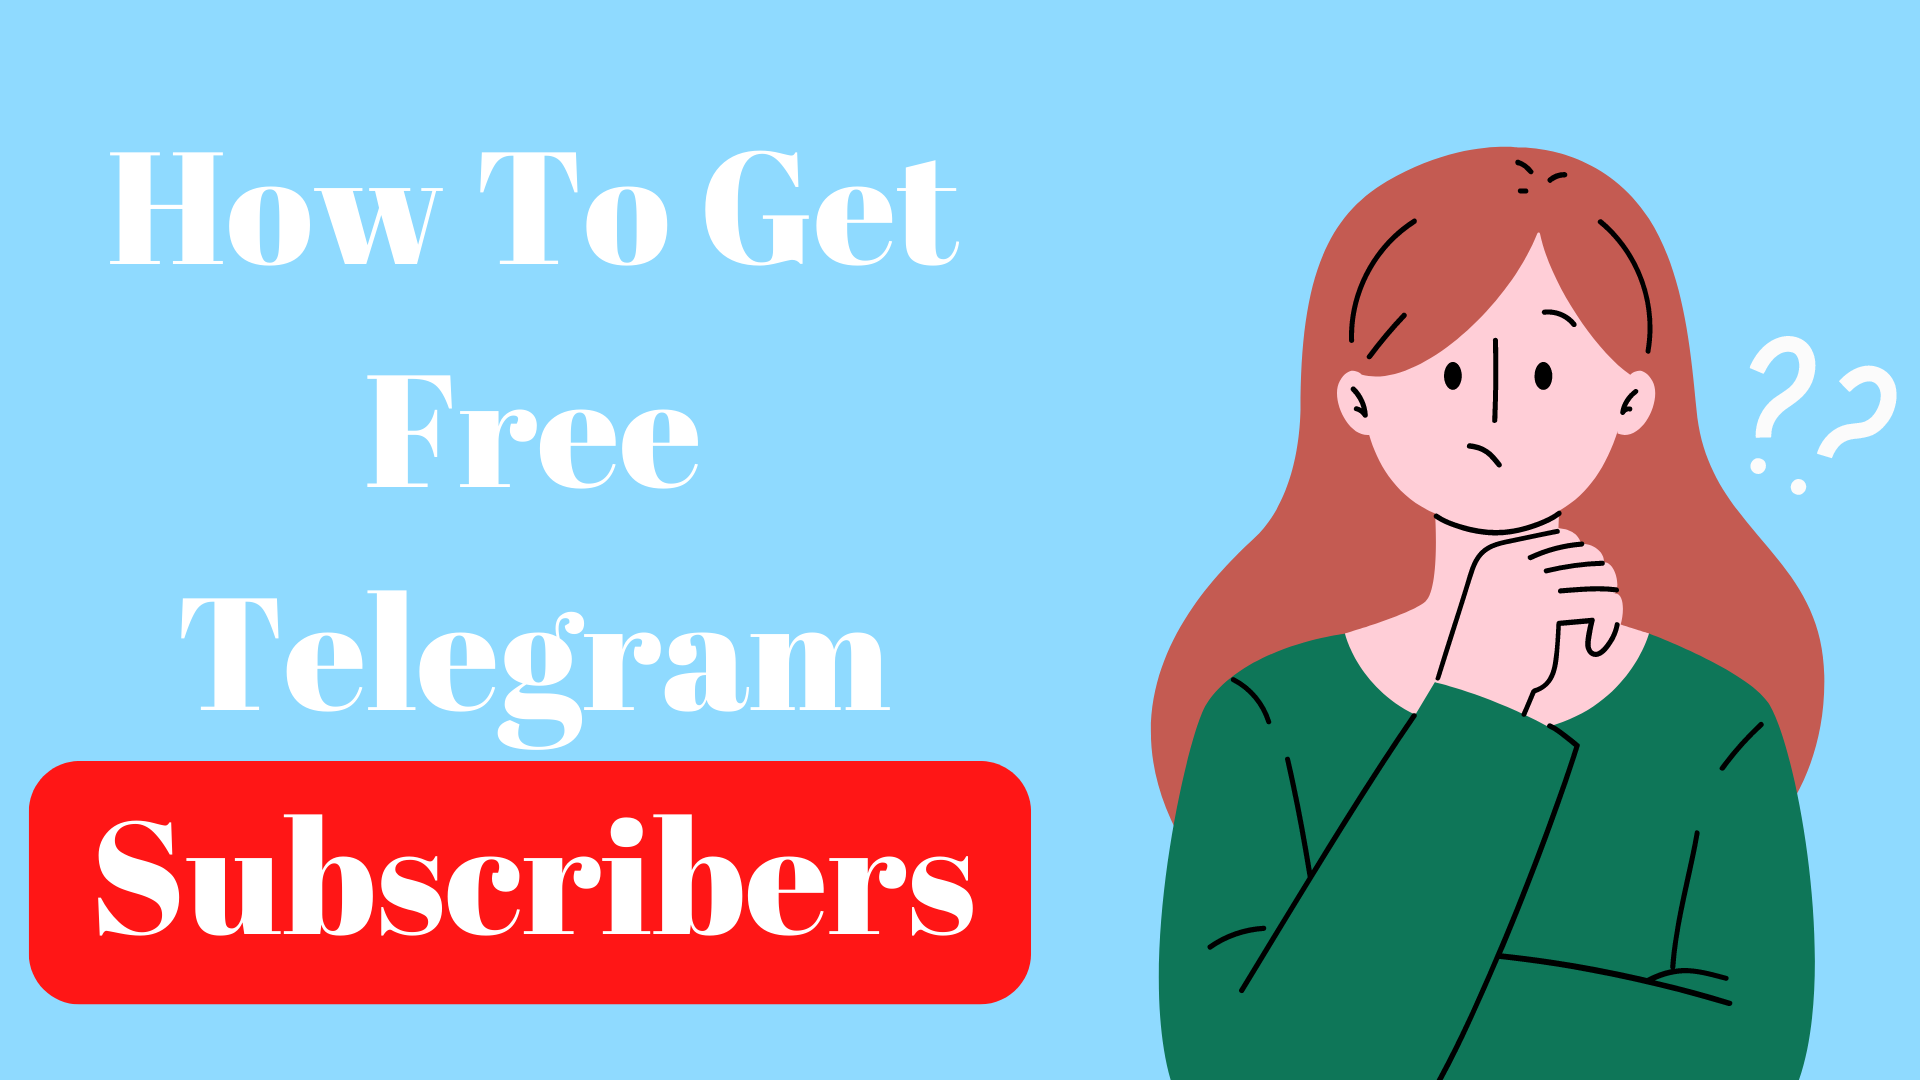 How To Get Free Telegram Subscribers?